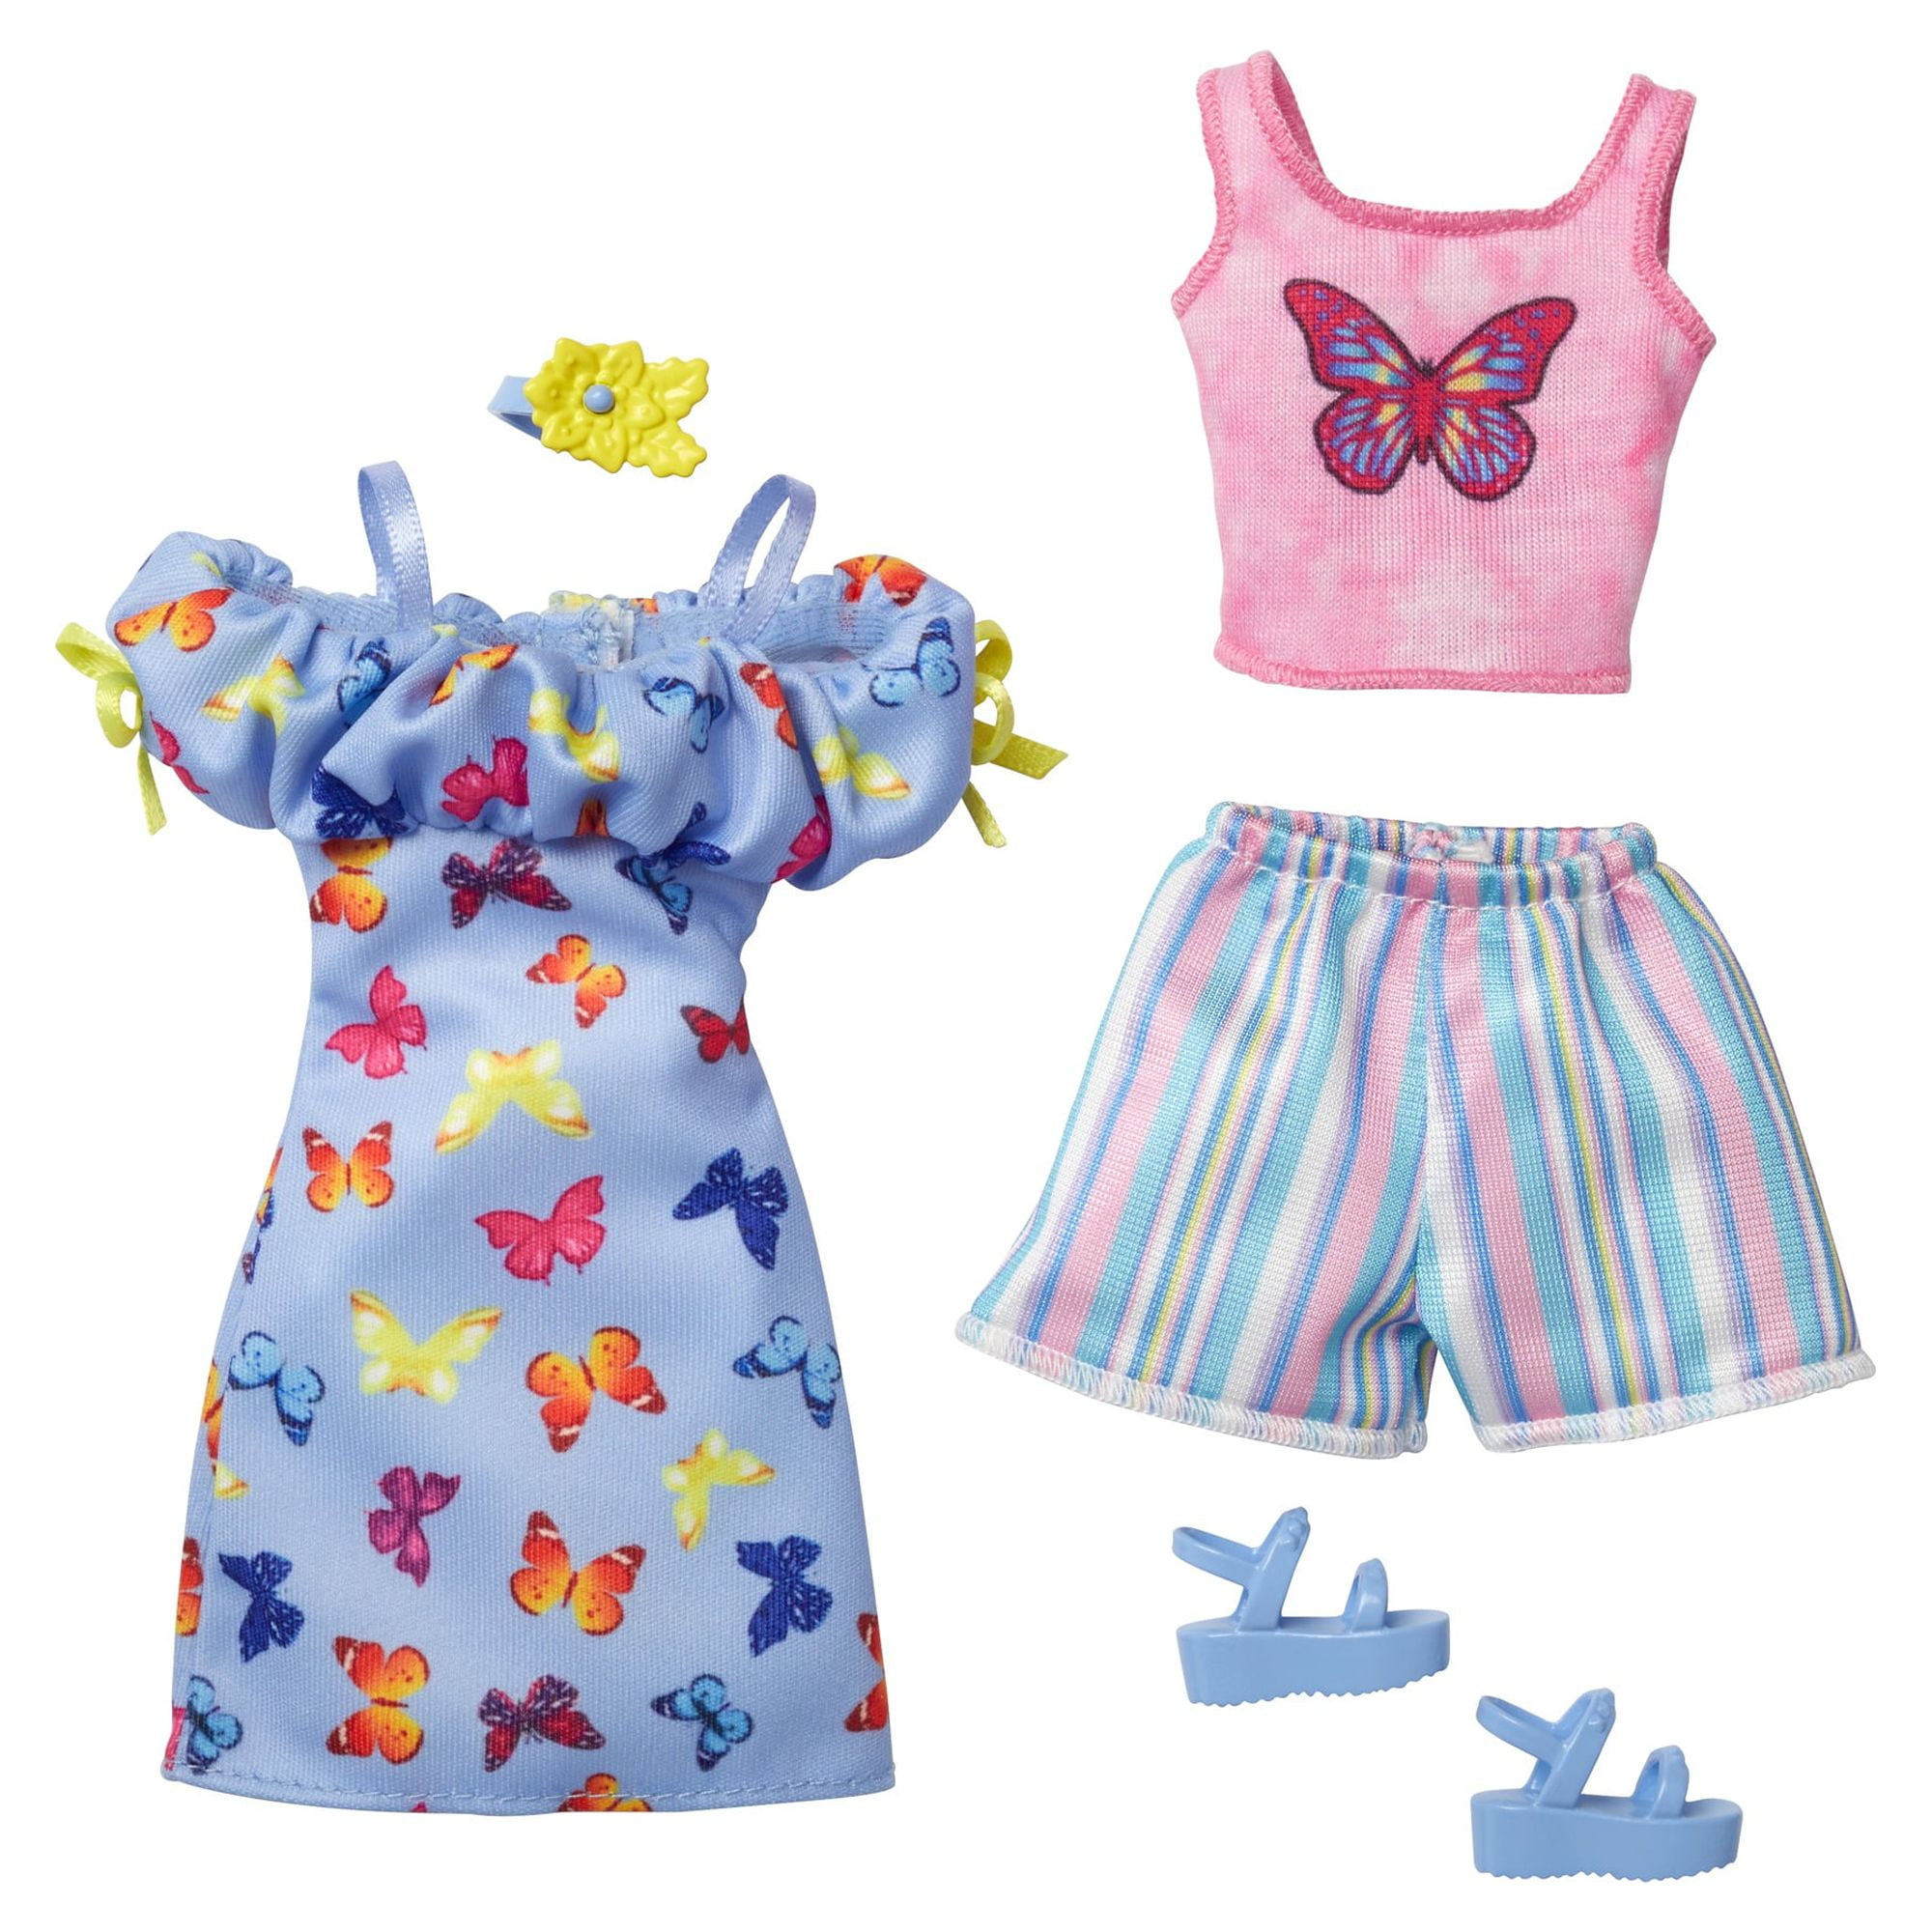 Barbie Butterfly Fashion 2-Pack